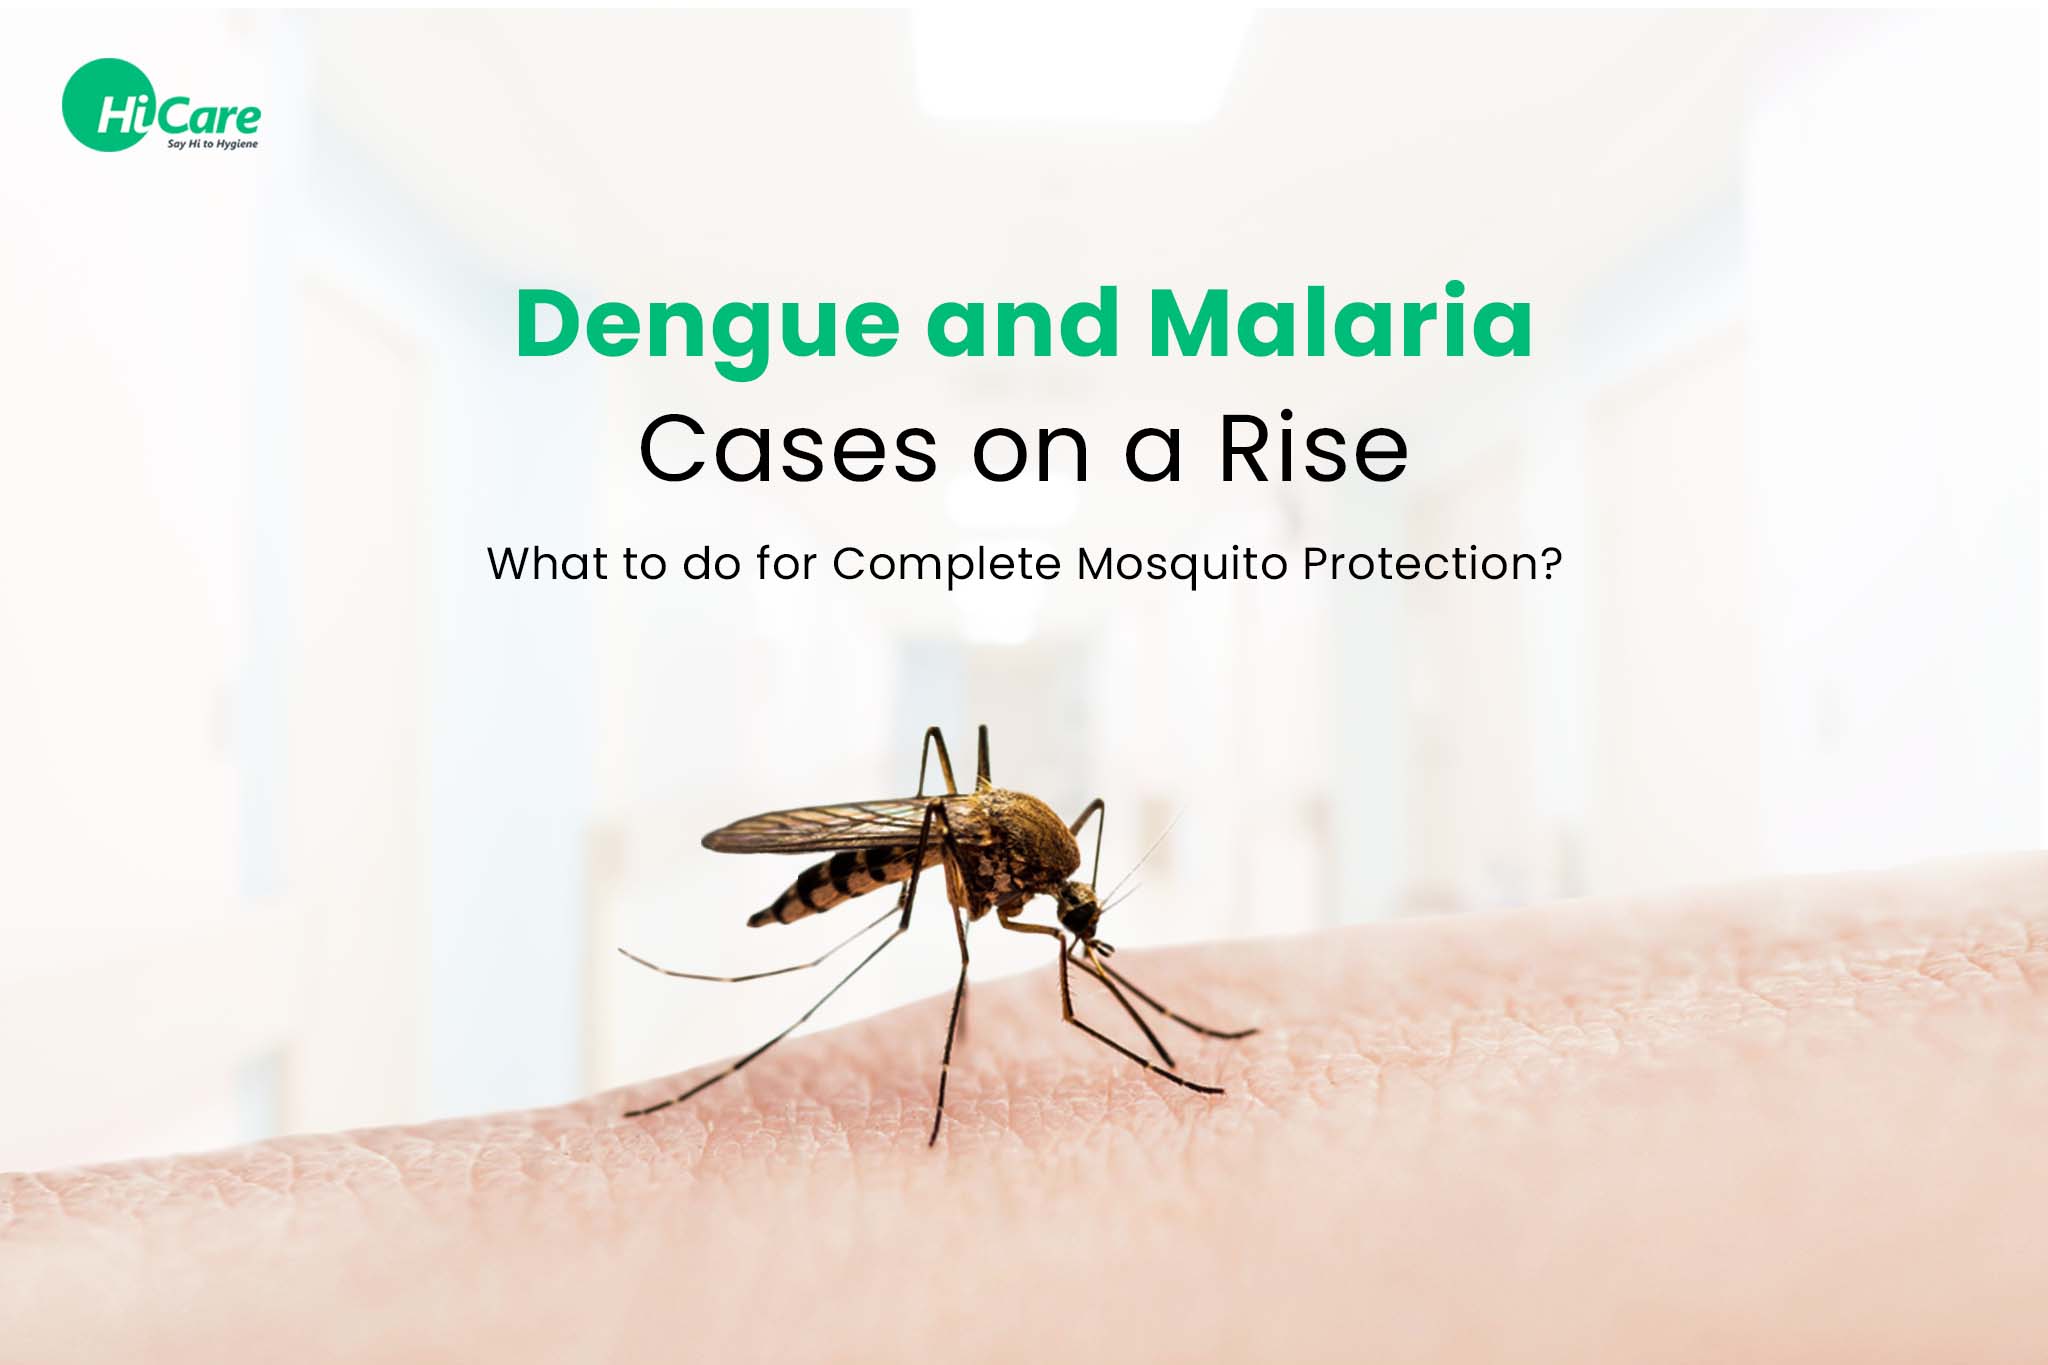 6 Ways to Protect Yourself from Dengue and Malaria